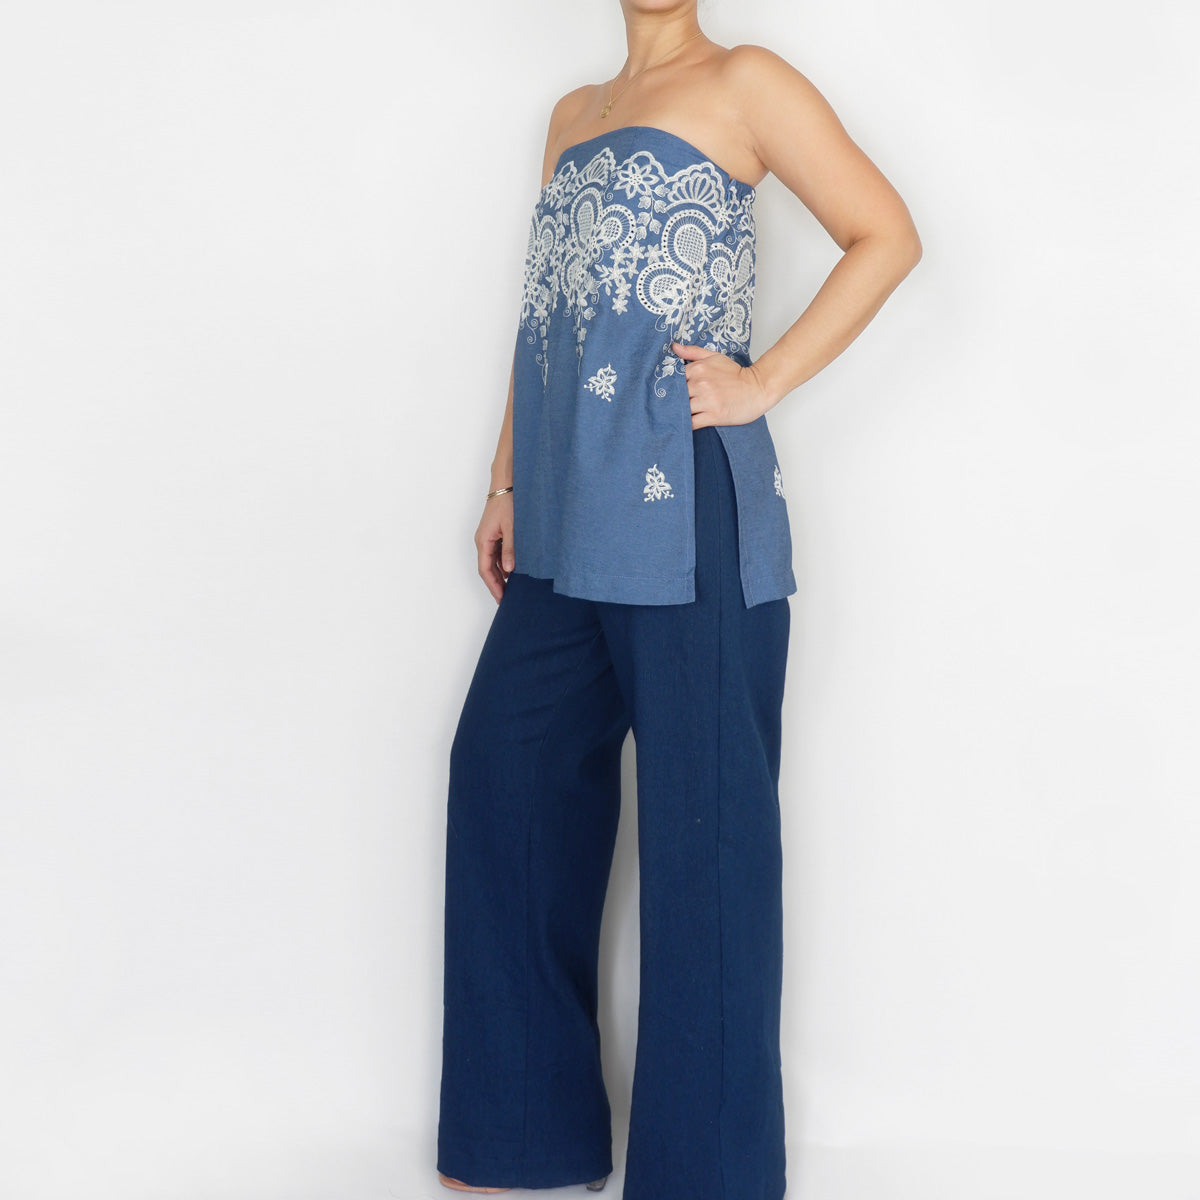 Uber Top in Blue Embroidery